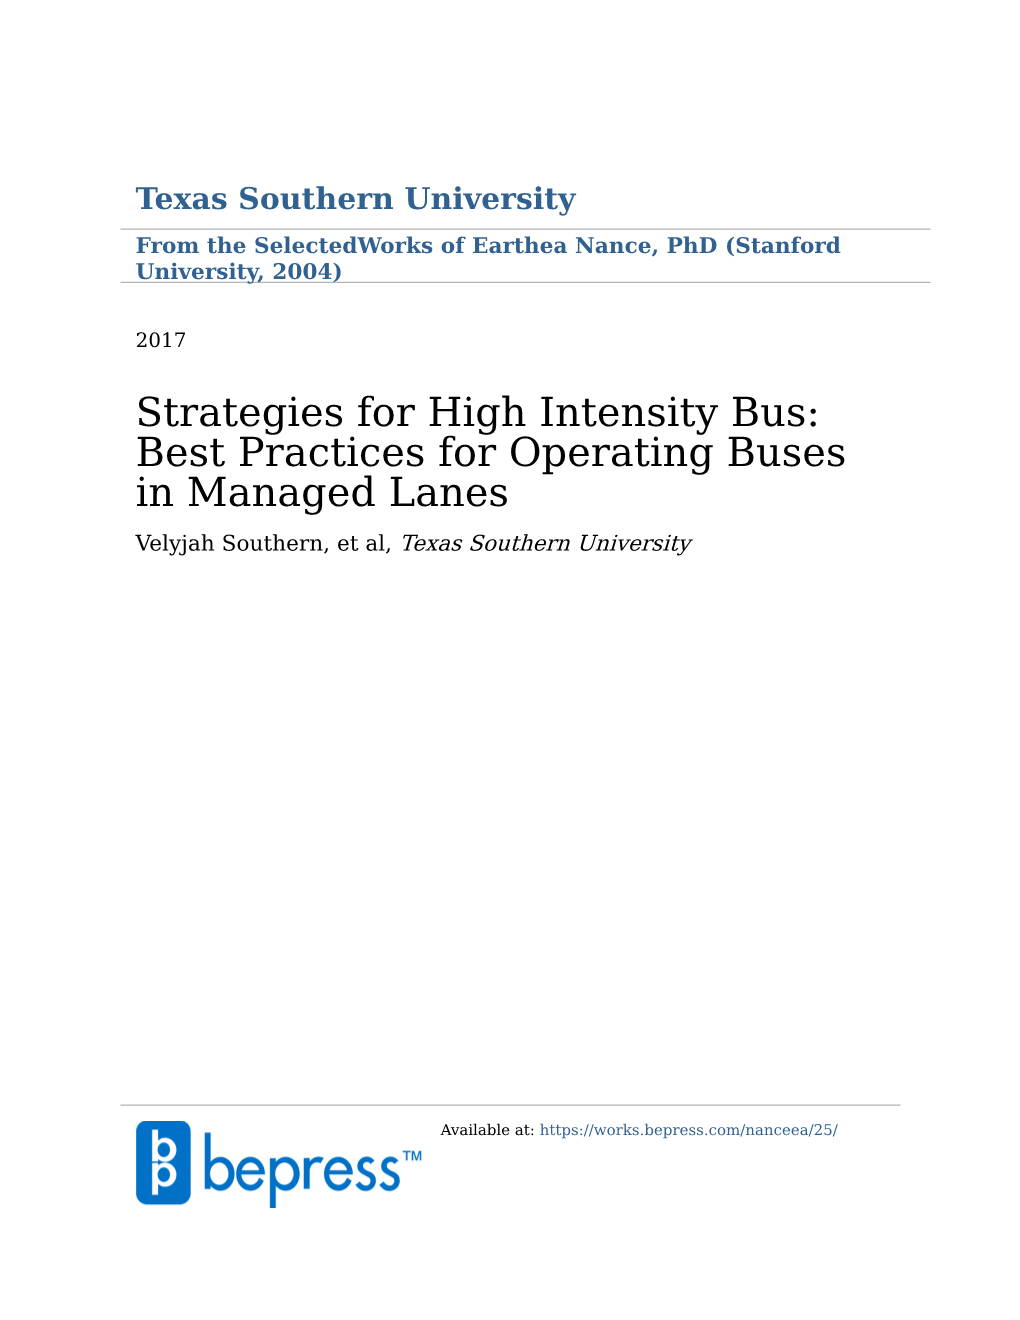 Strategies for High Intensity Bus: Best Practices for Operating Buses in Managed Lanes Velyjah Southern, Et Al, Texas Southern University